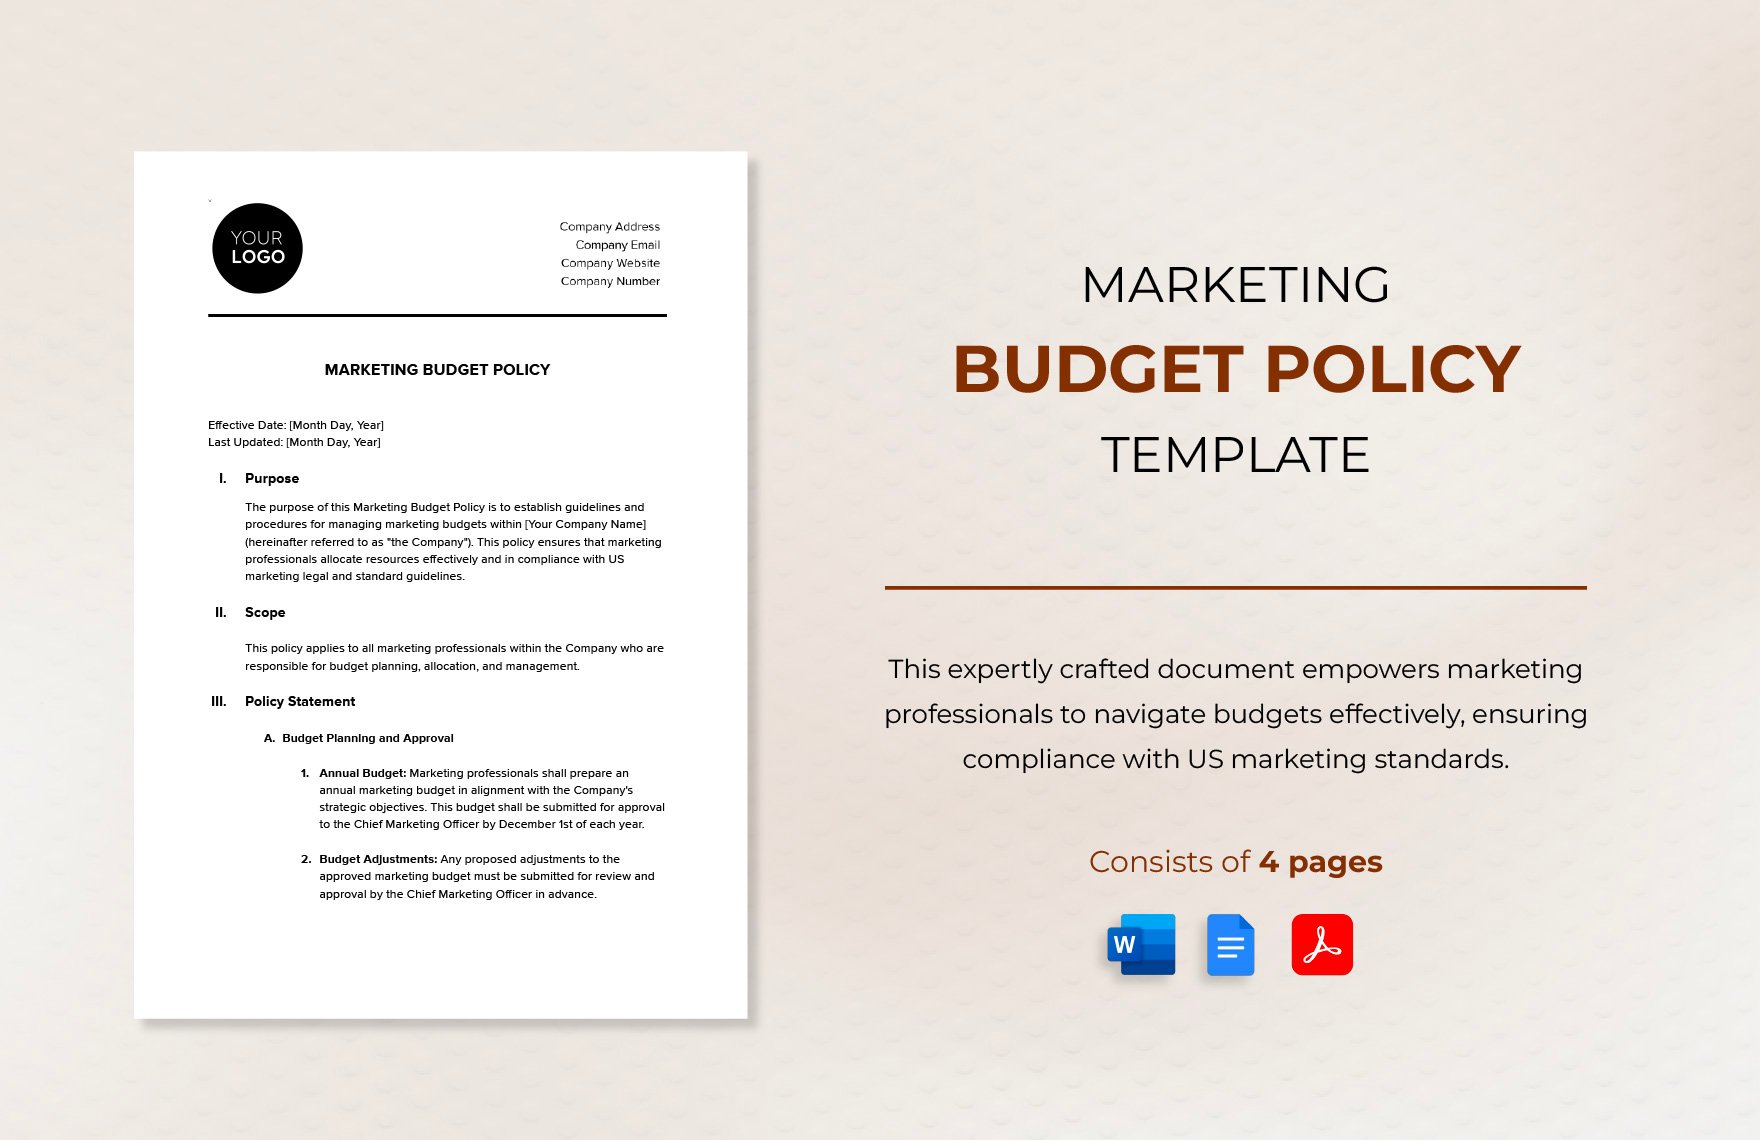 Marketing Budget Policy Template